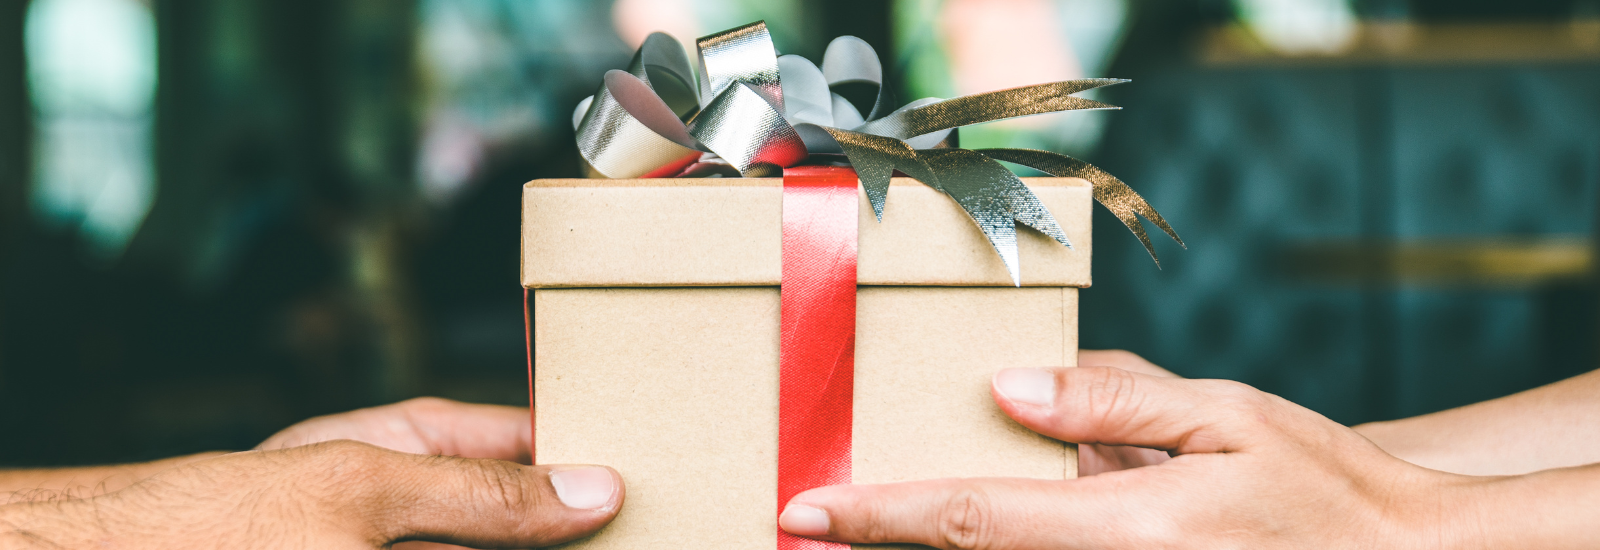 10 Gifts for People with Parkinson’s, Tremor, and More